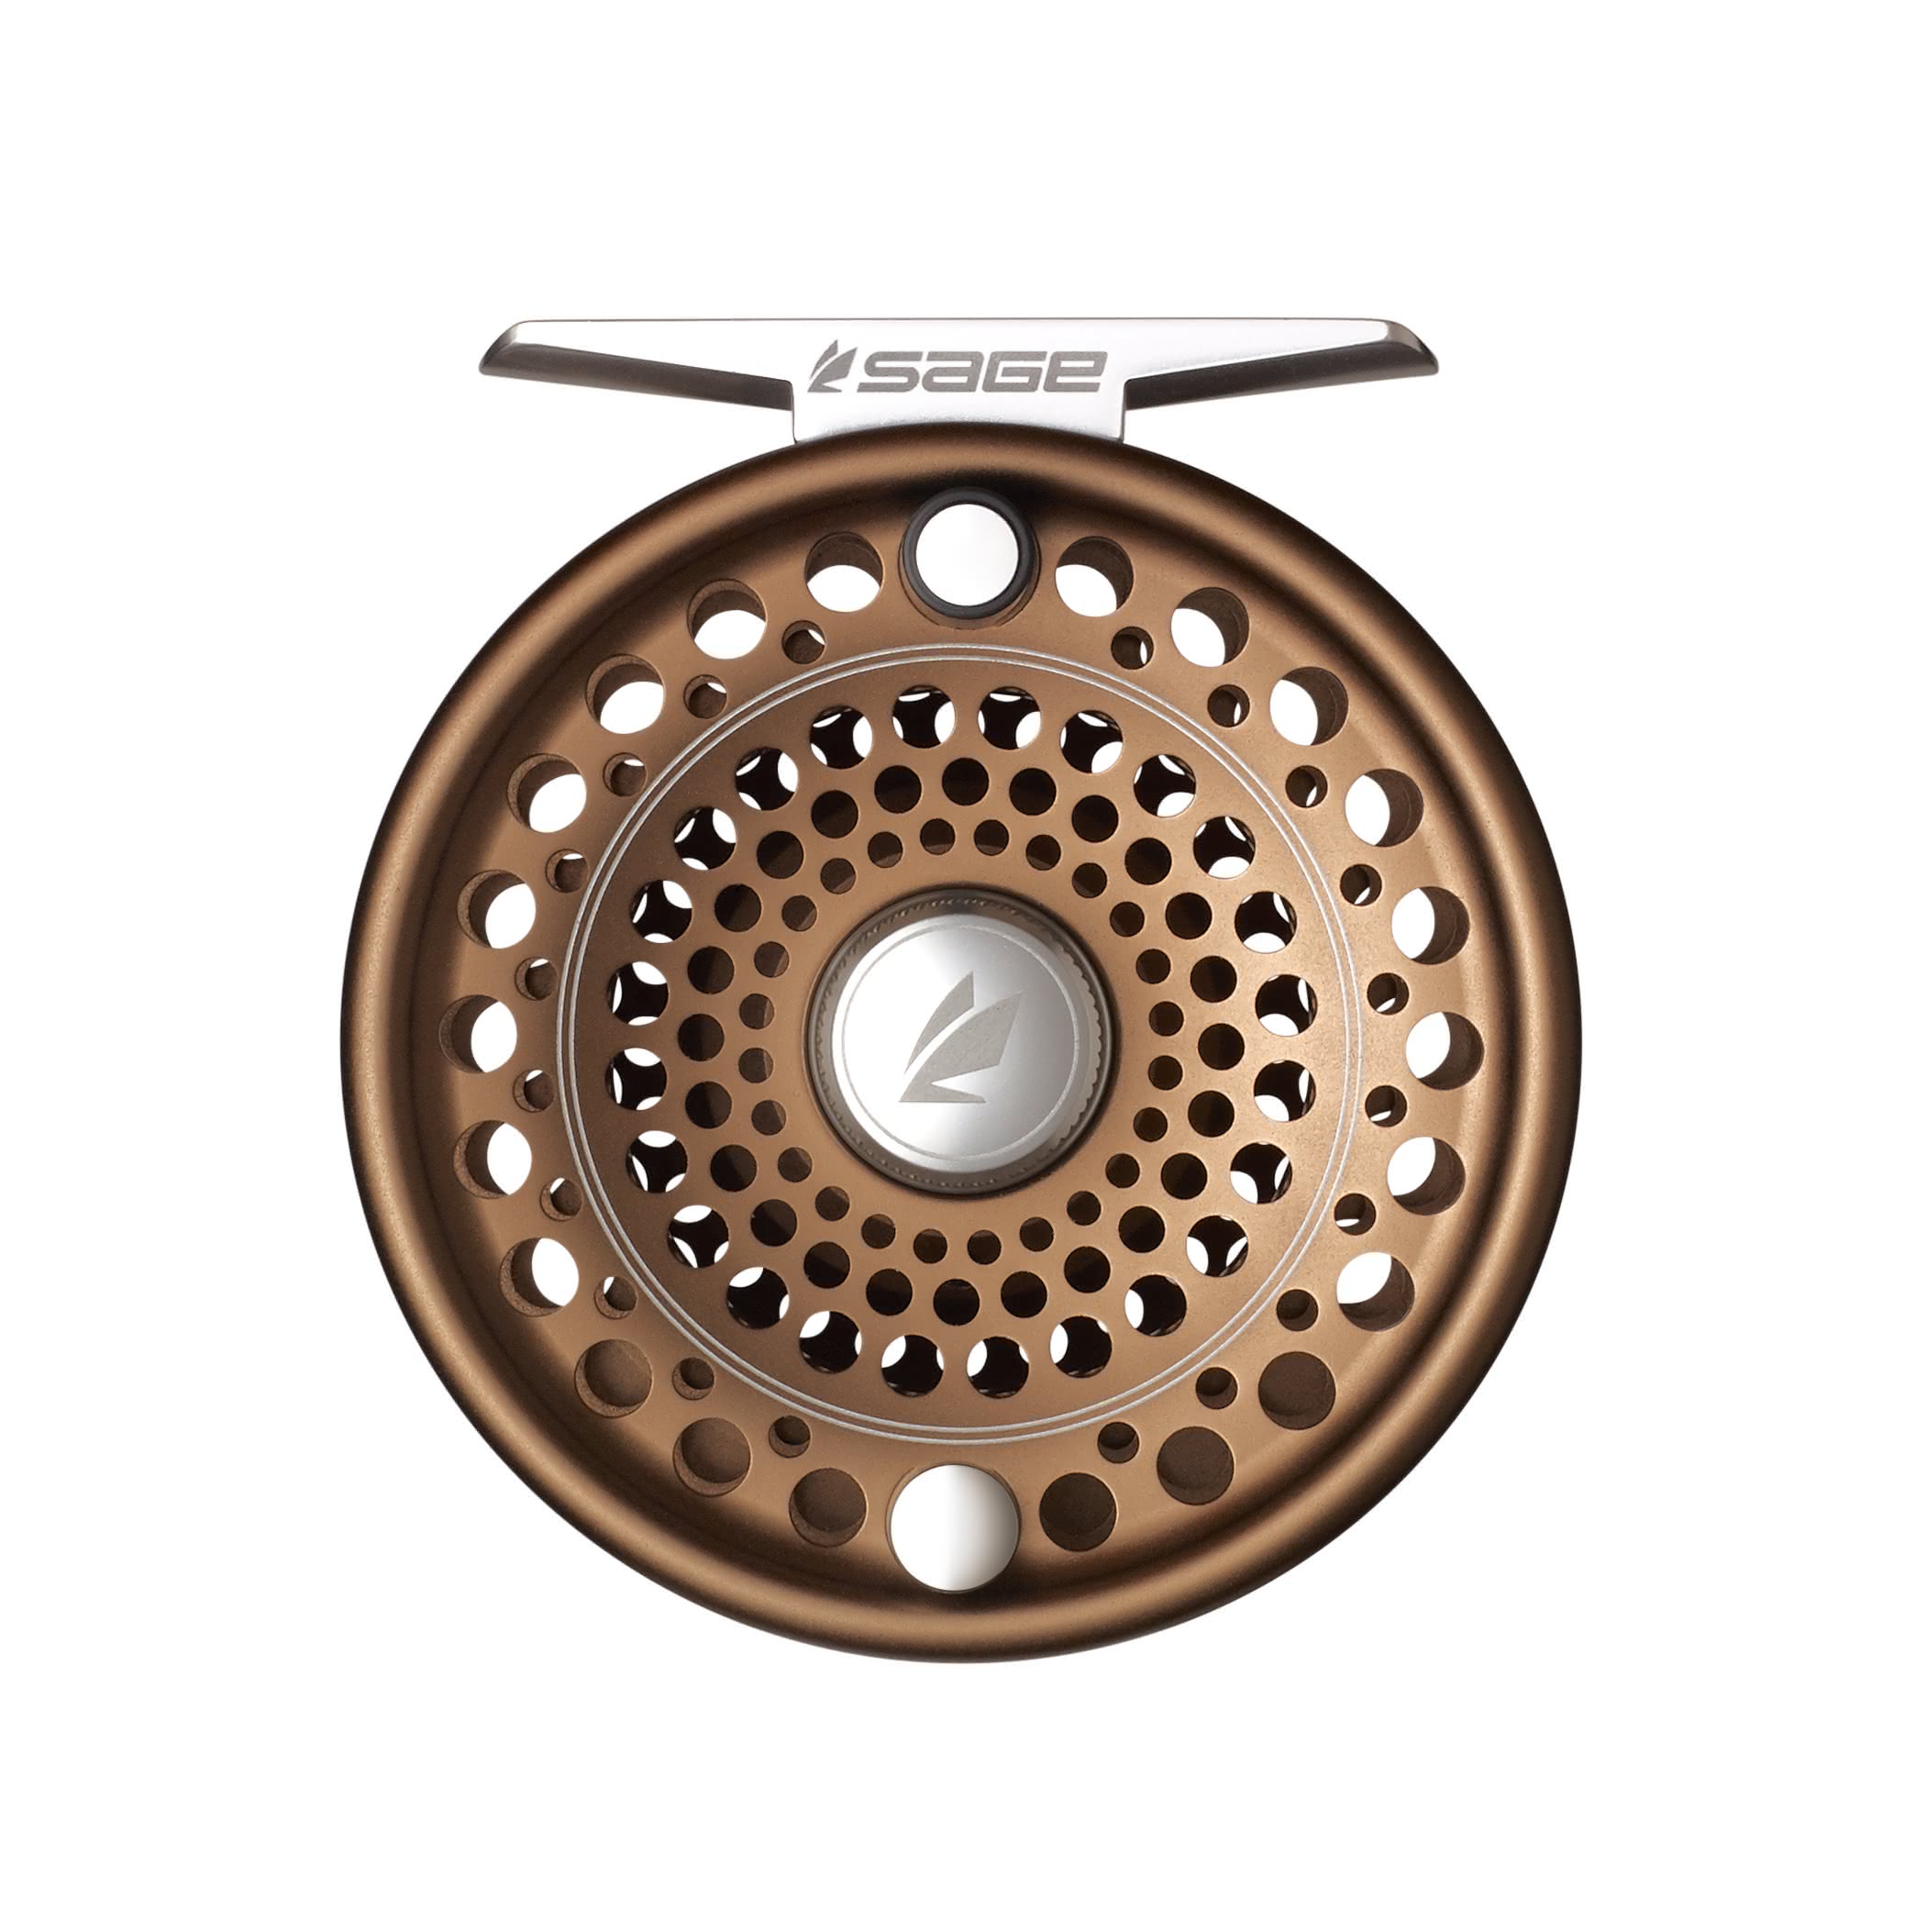 Trout Reel (bronce)